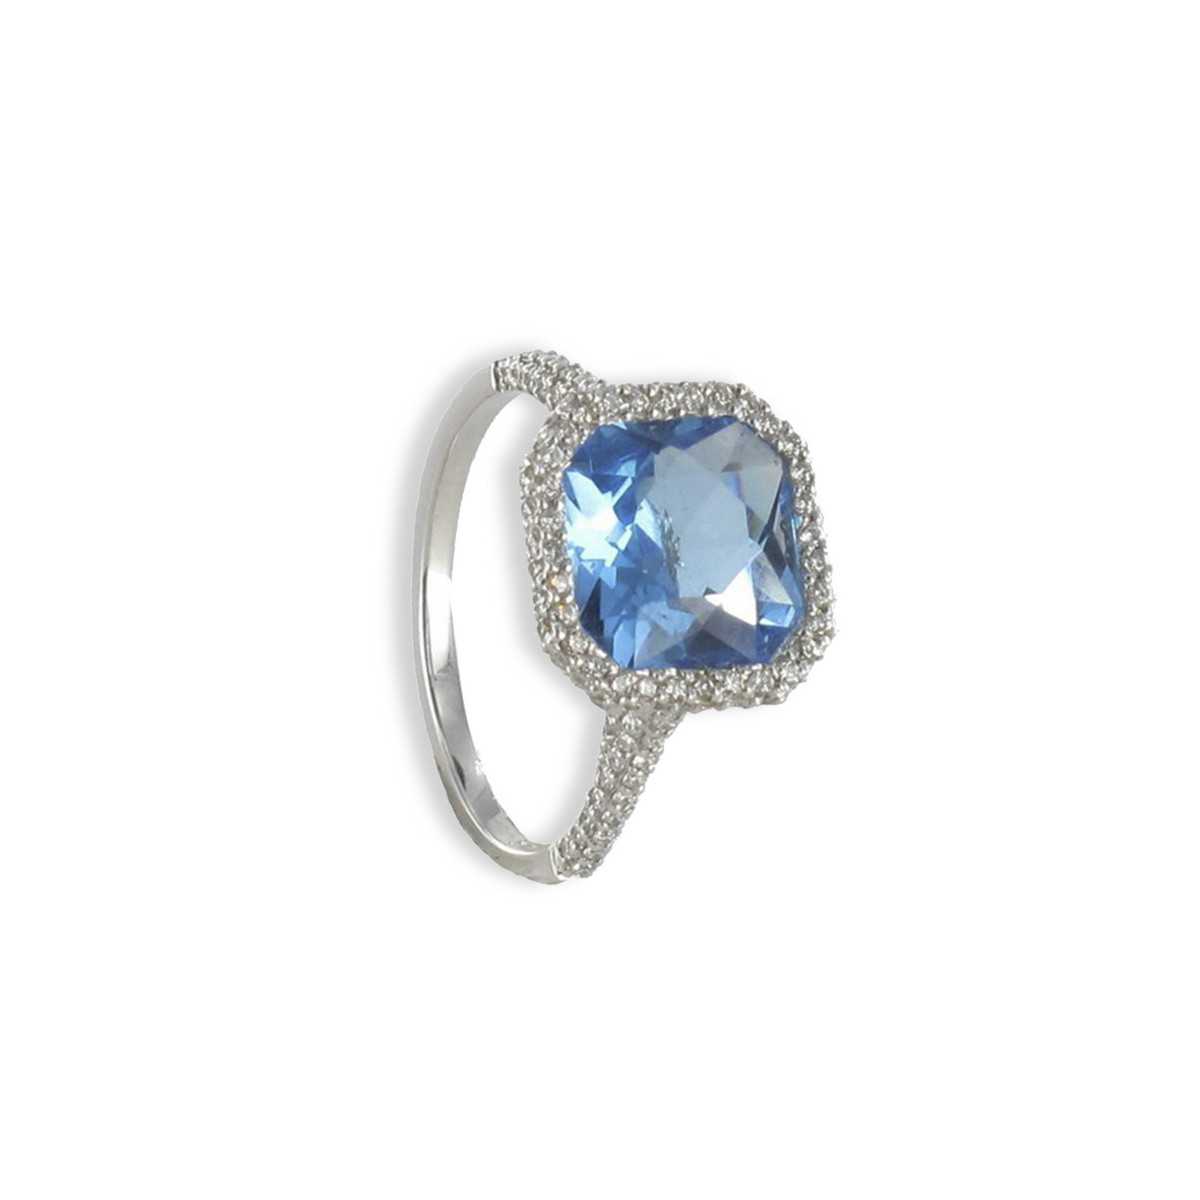 RING WITH SQUARE TOPAZ AND DIAMONDS